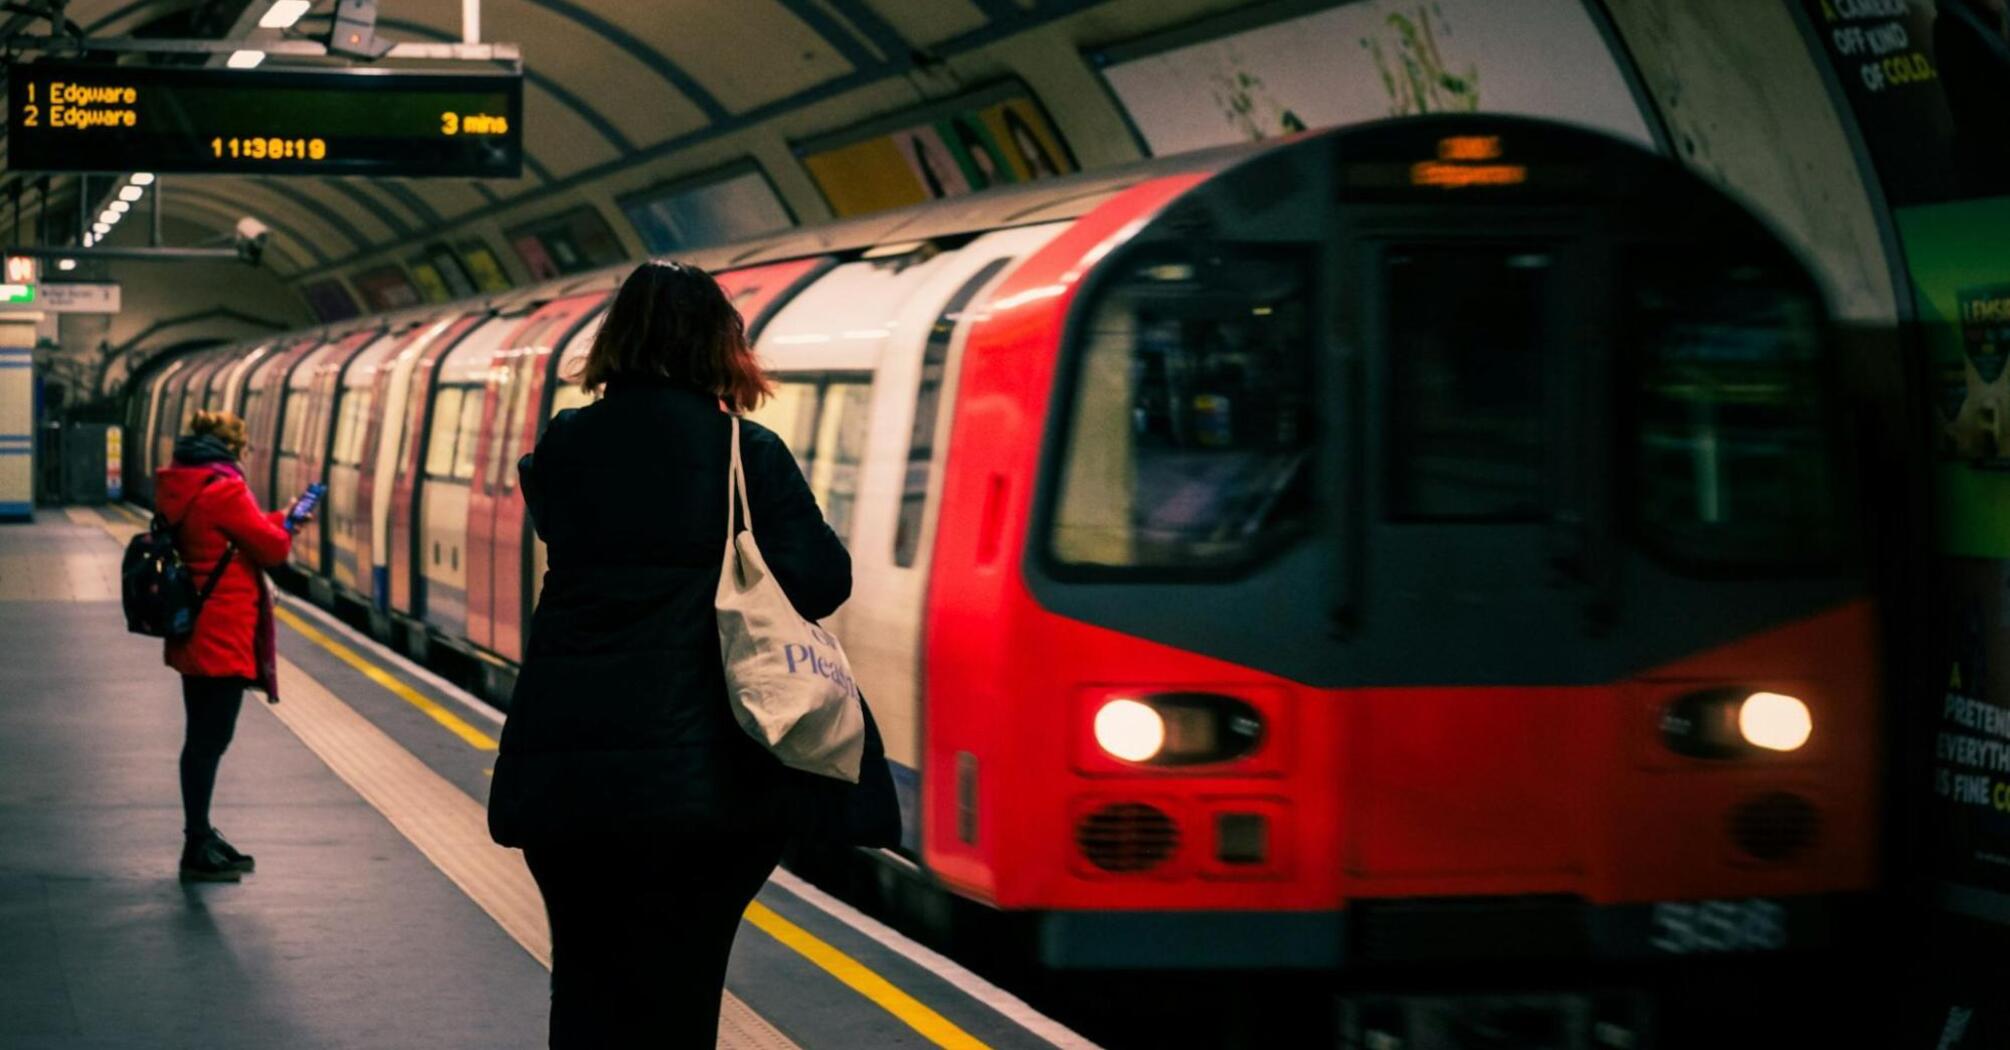 A red and white London Underground train at a station with passengers waiting on the platform